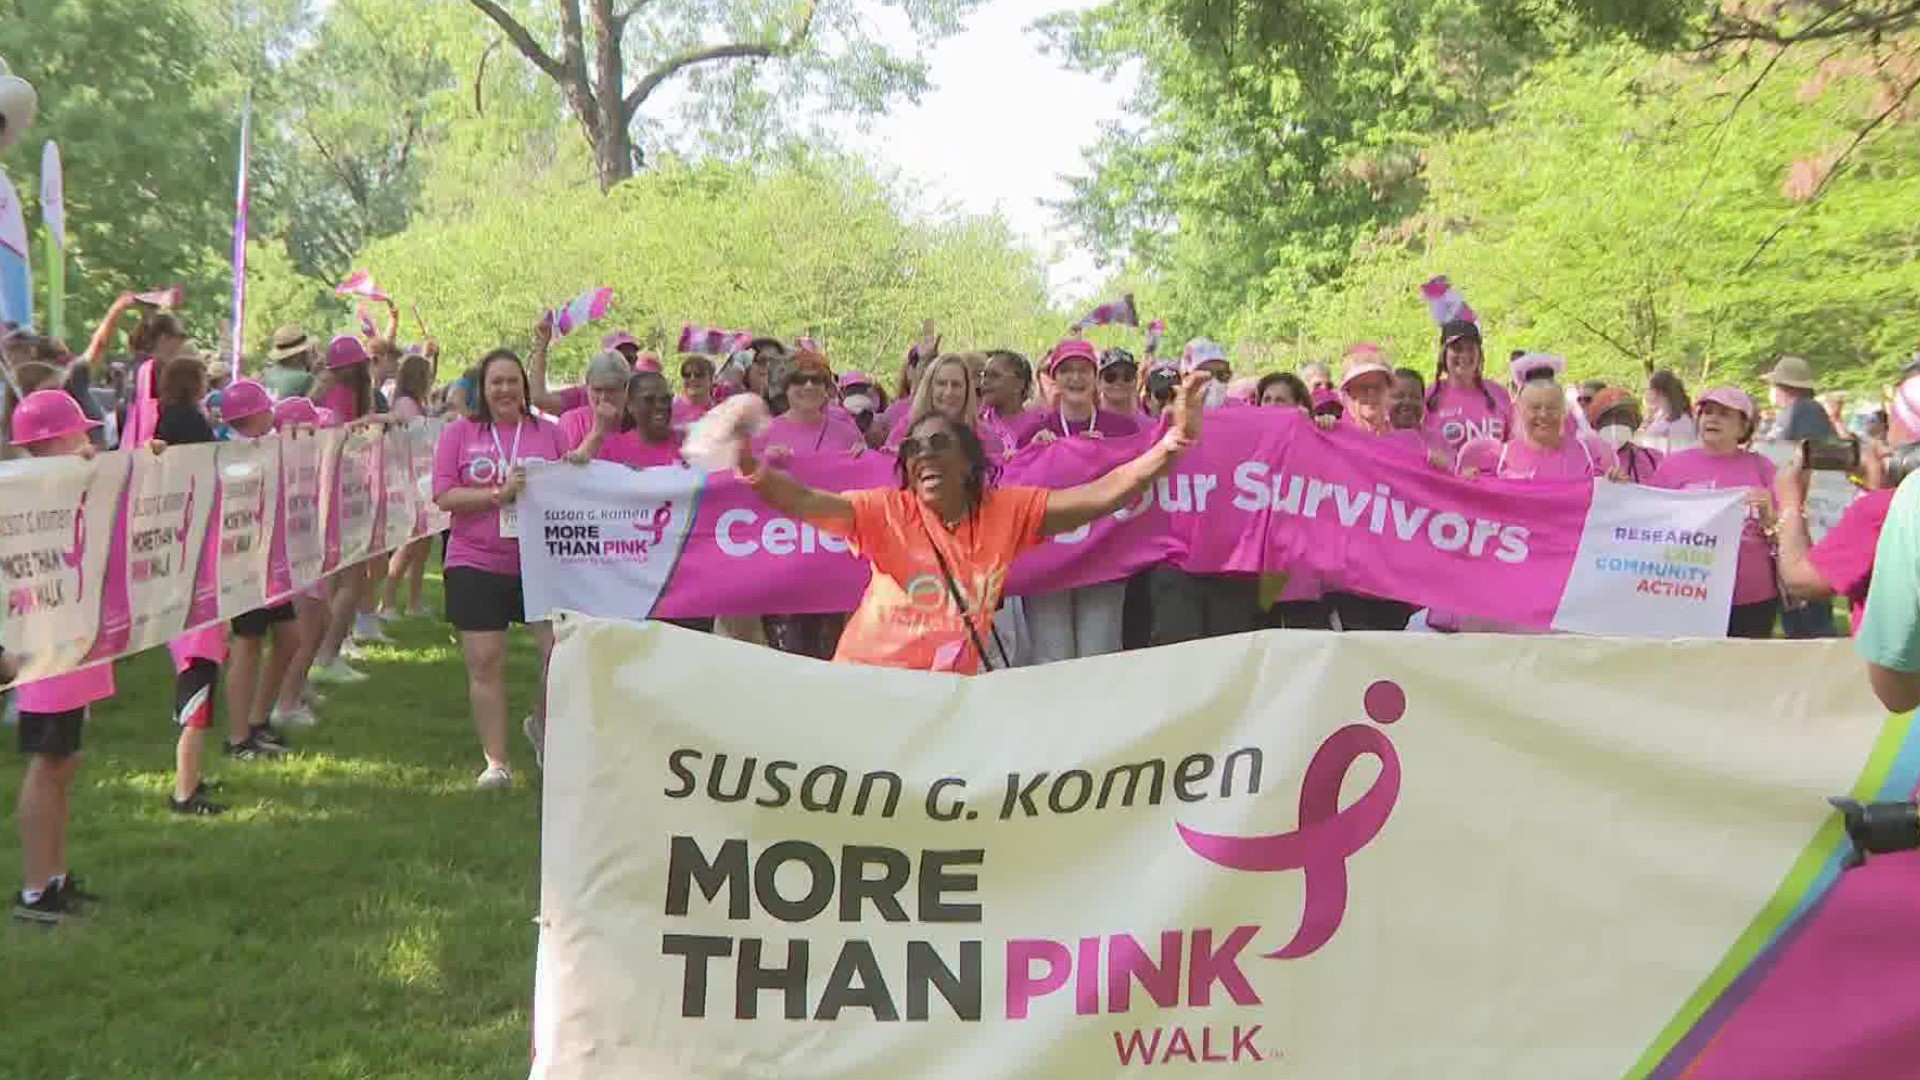 For the first time since the pandemic began, the walk for breast cancer was back in person at Tower Grove Park on Saturday. More than 4,000 people got their steps in